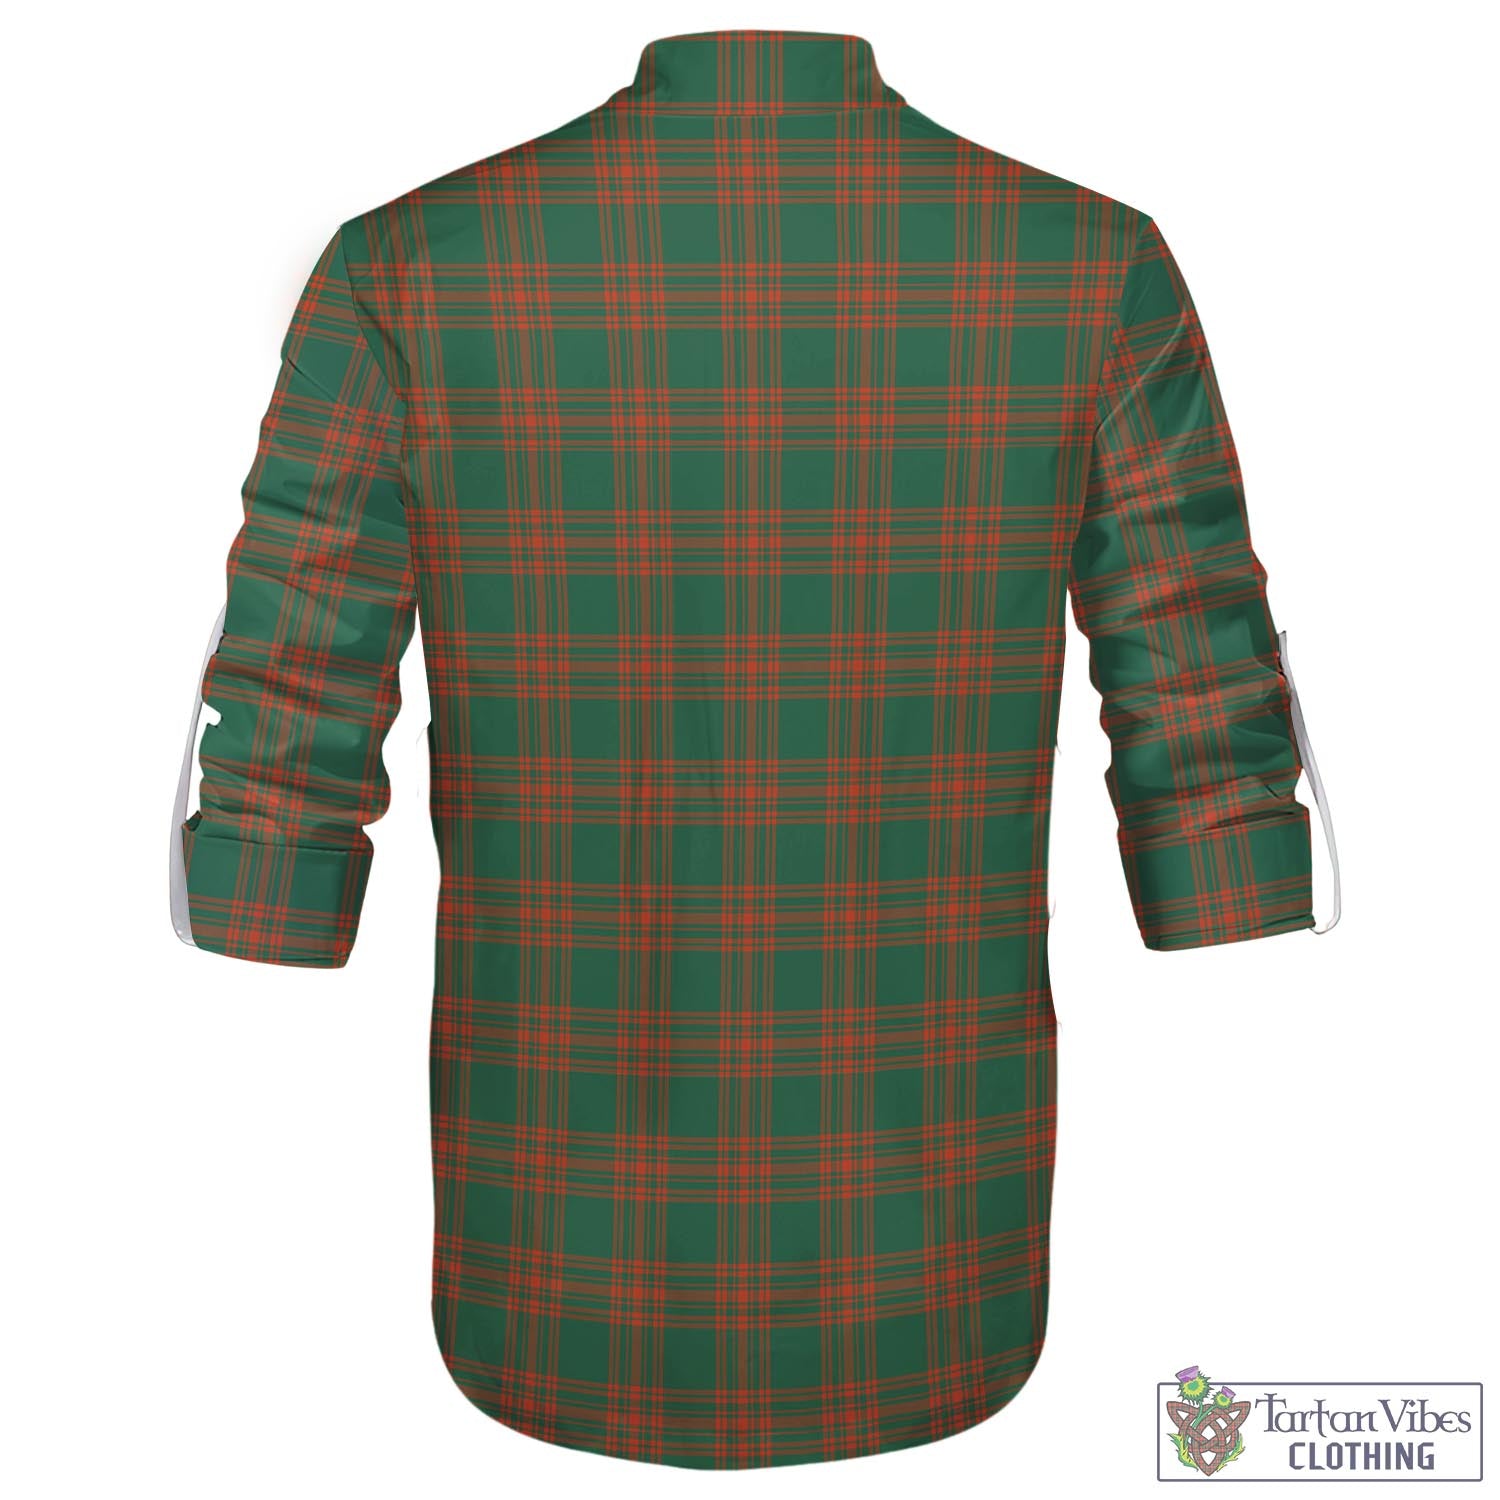 Tartan Vibes Clothing Menzies Green Ancient Tartan Men's Scottish Traditional Jacobite Ghillie Kilt Shirt with Family Crest